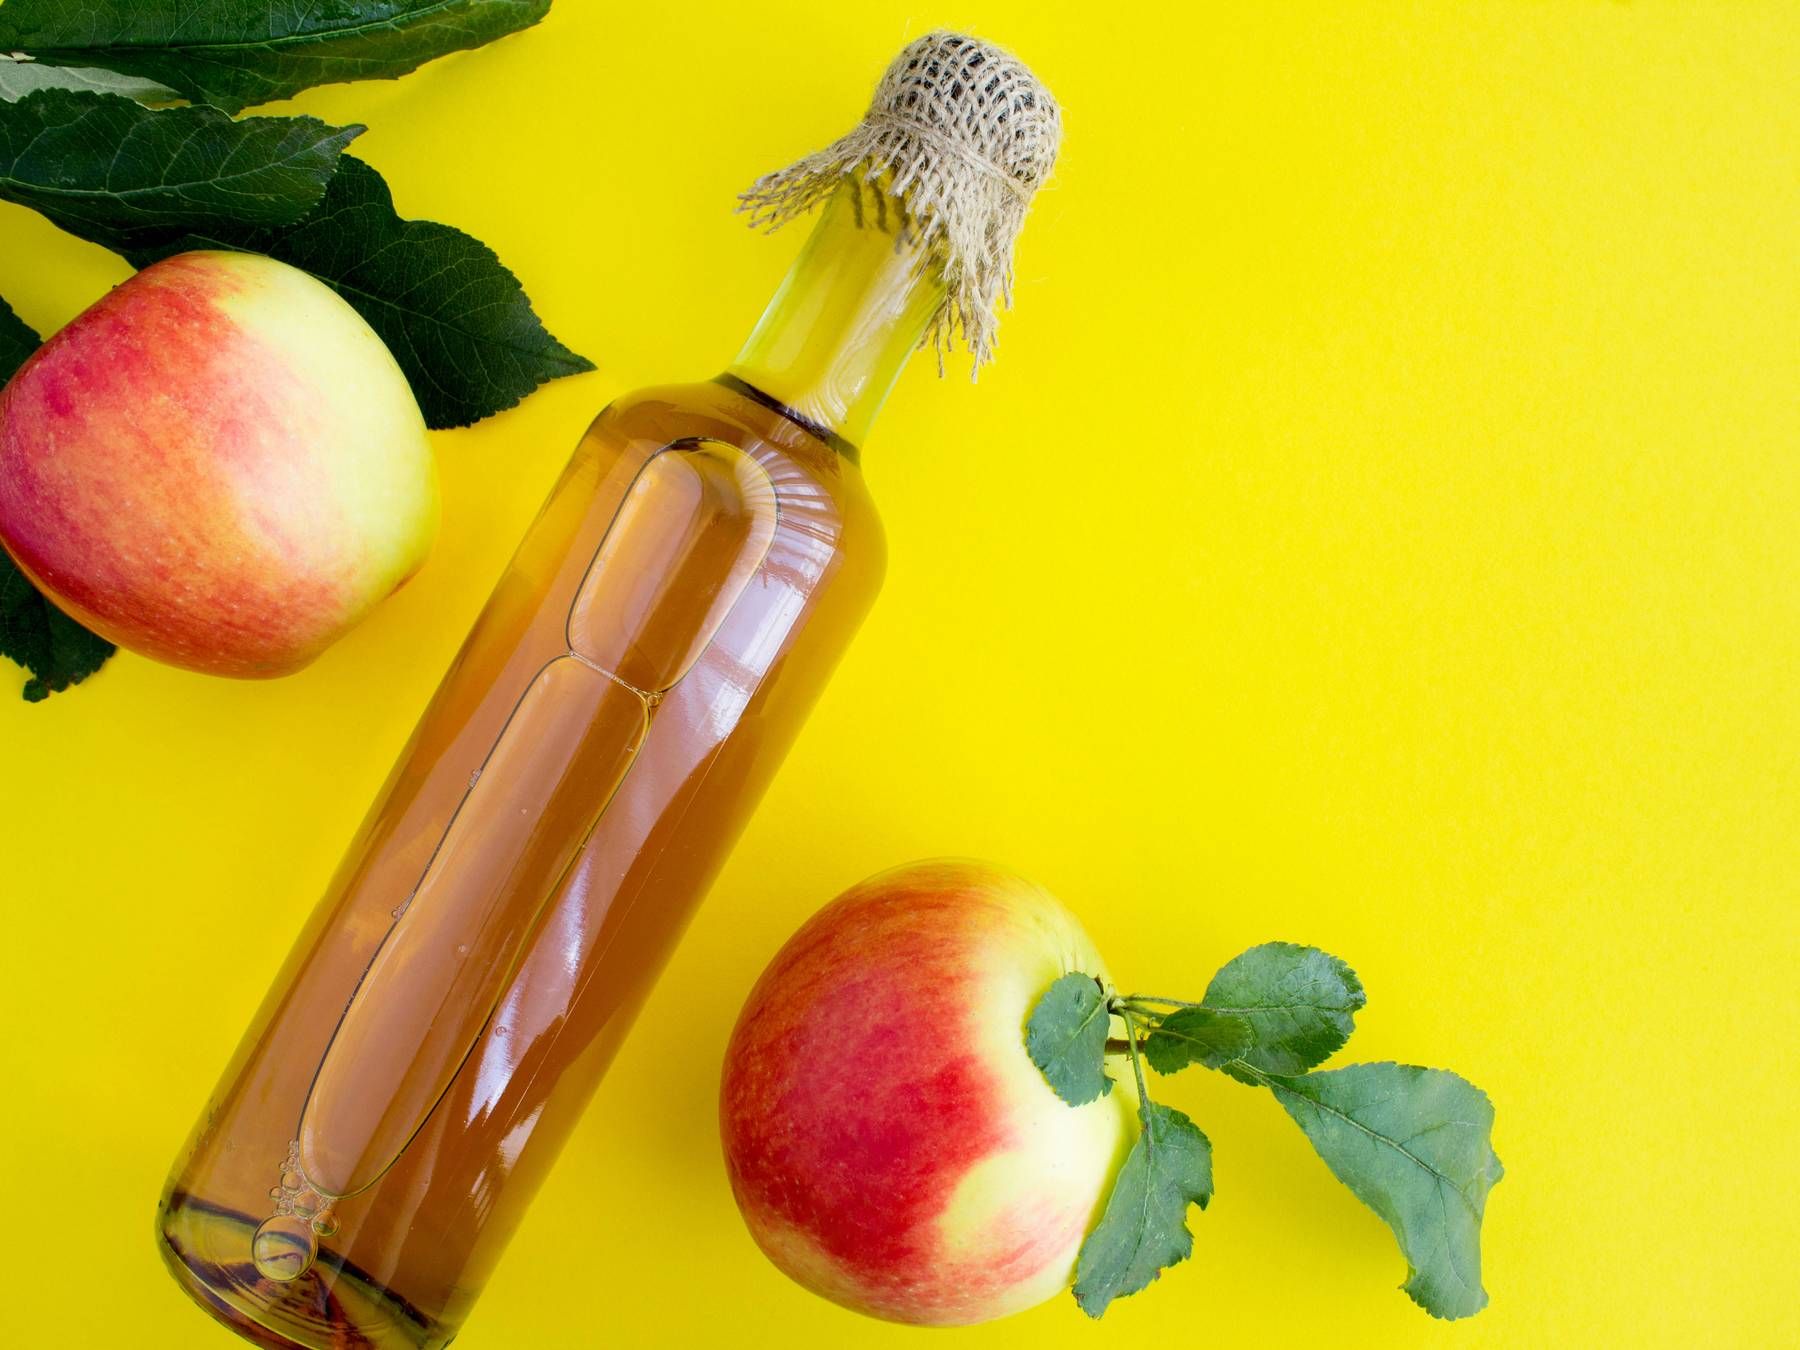 A lot of people swear by apple cider vinegar, but will it really improve your life?